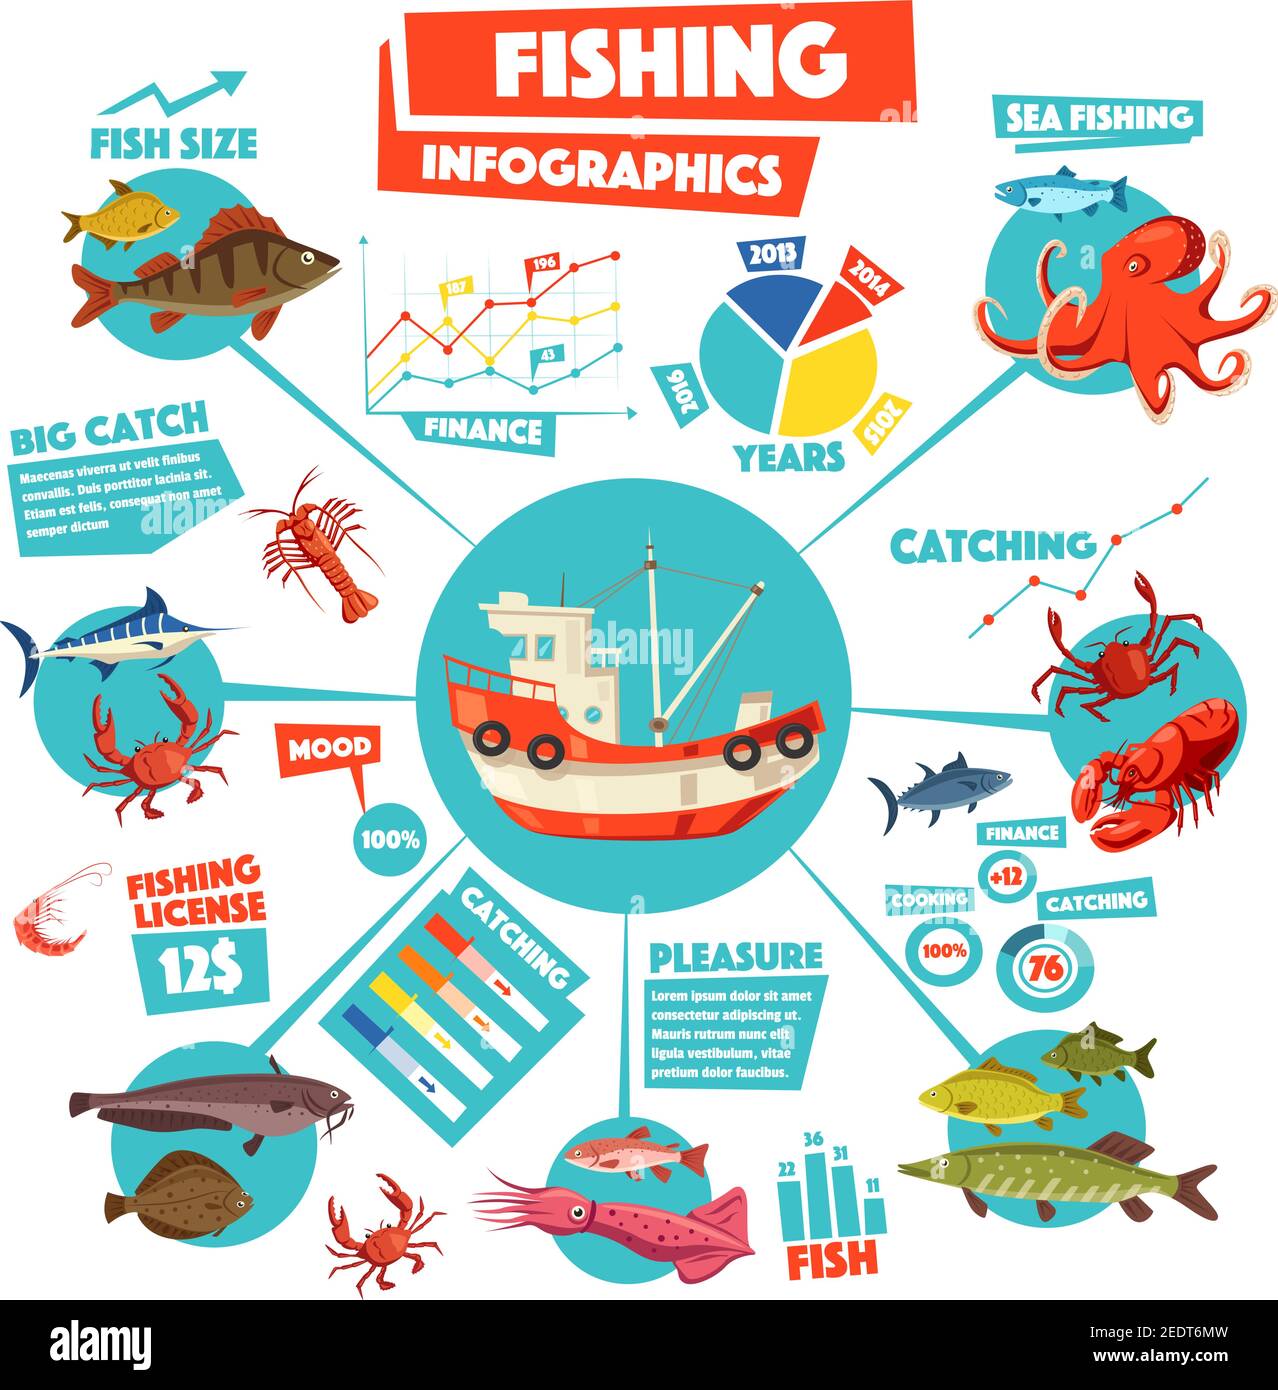 Fishing infographics with fishing boat, surrounded by pie chart, graph and diagram with freshly caught fish, crab, shrimp, lobster, squid and octopus. Stock Vector